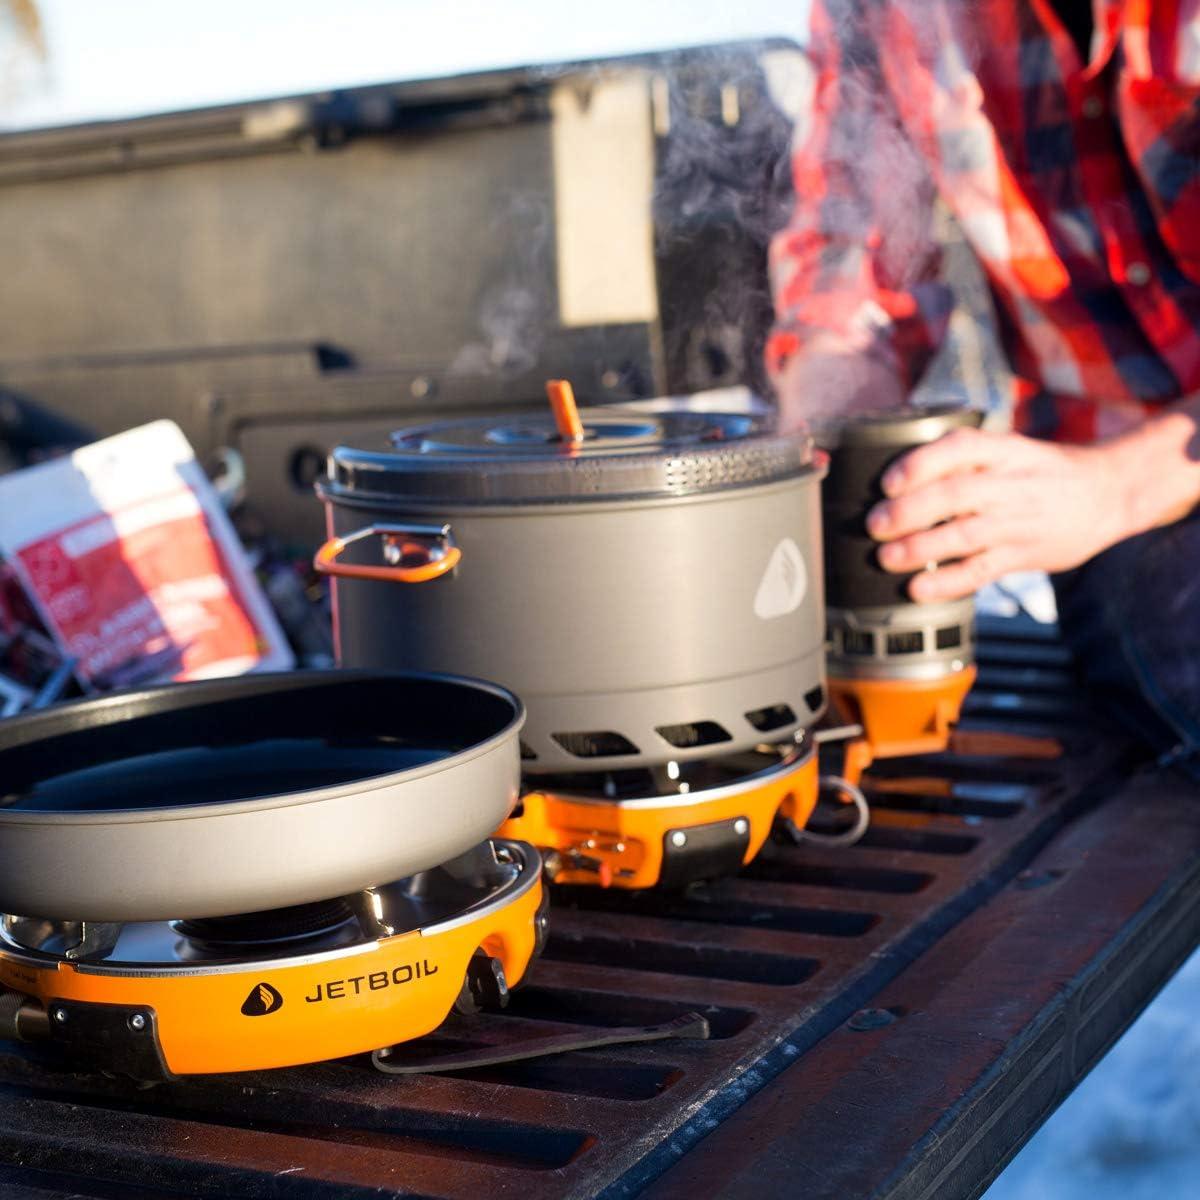 Jetboil - Backpacking & Camping Stoves